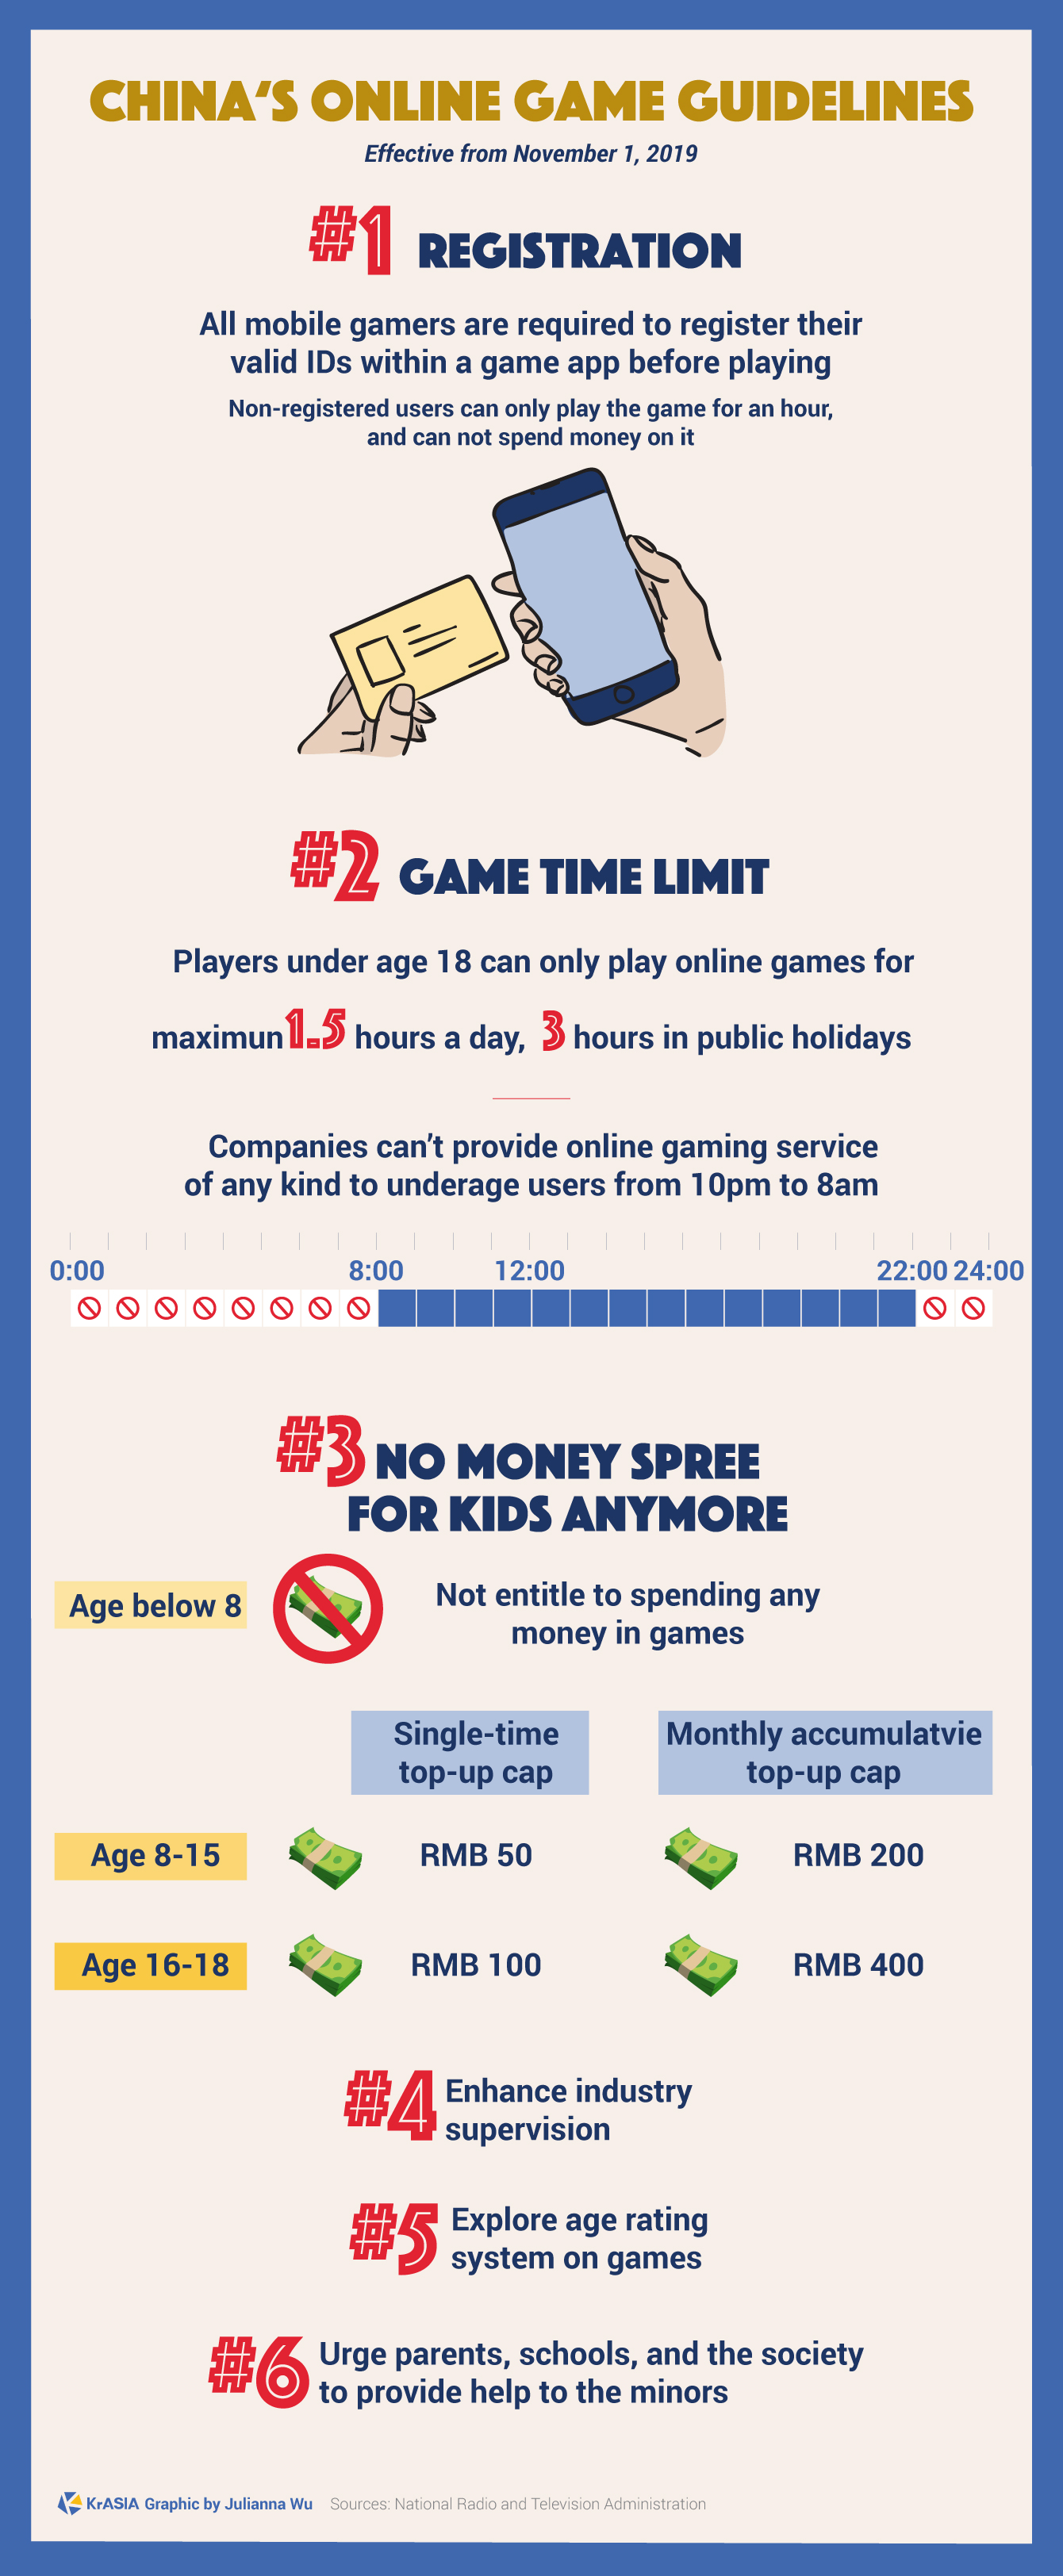 China allows children under 18 to play online games for one hour